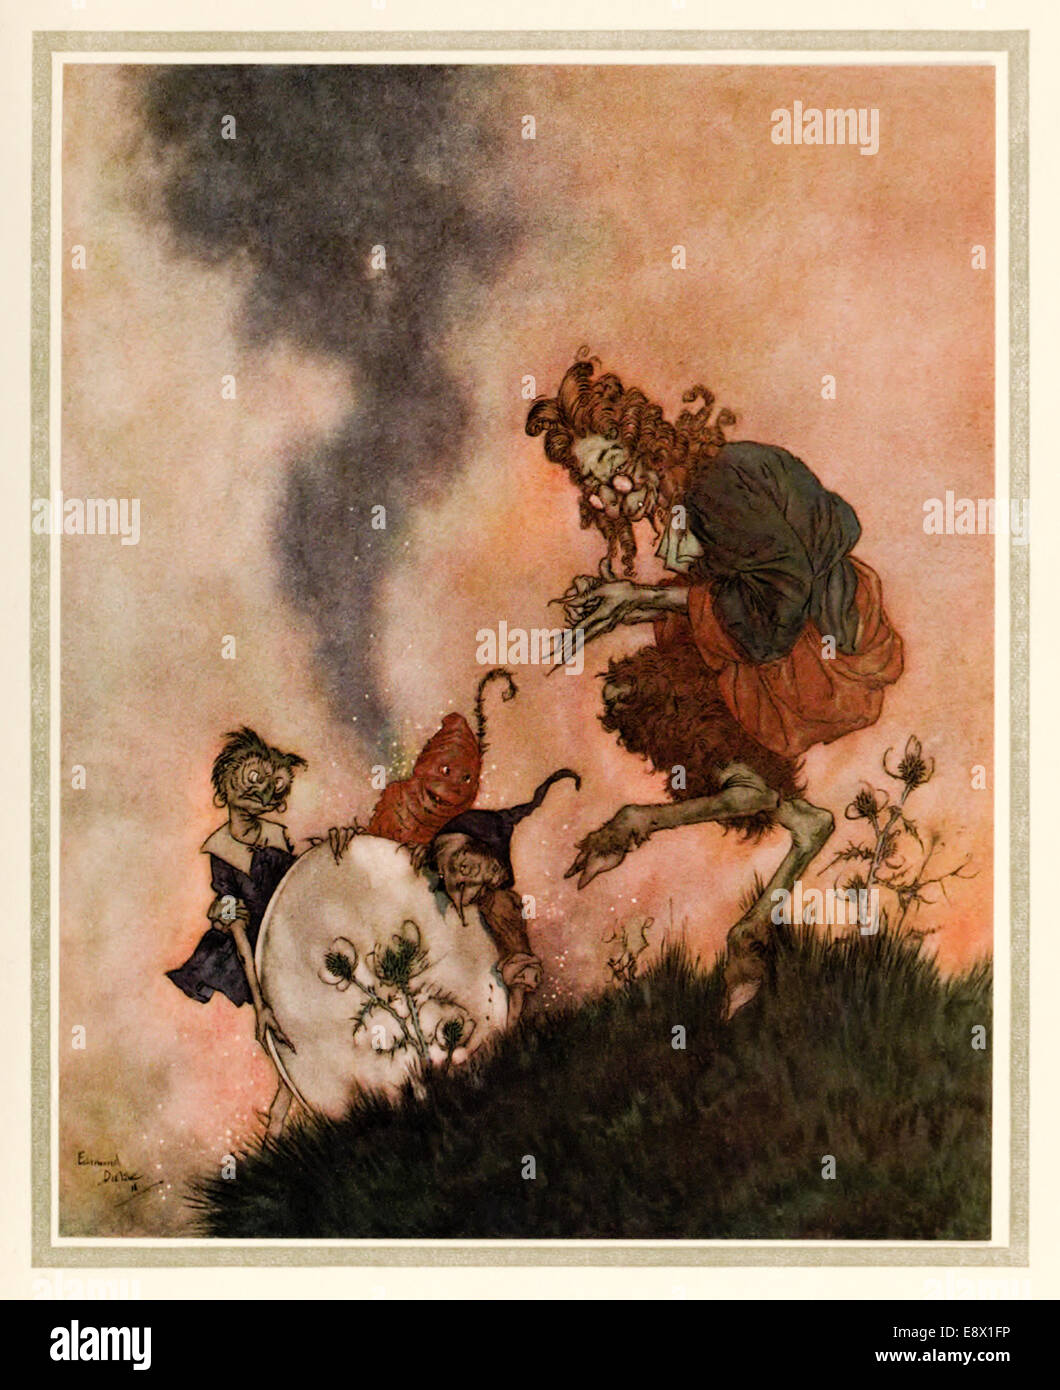 Snow Queen - Edmund Dulac (1882-1953) illustration from ‘Stories from Hans Andersen’. See description for more information. Stock Photo